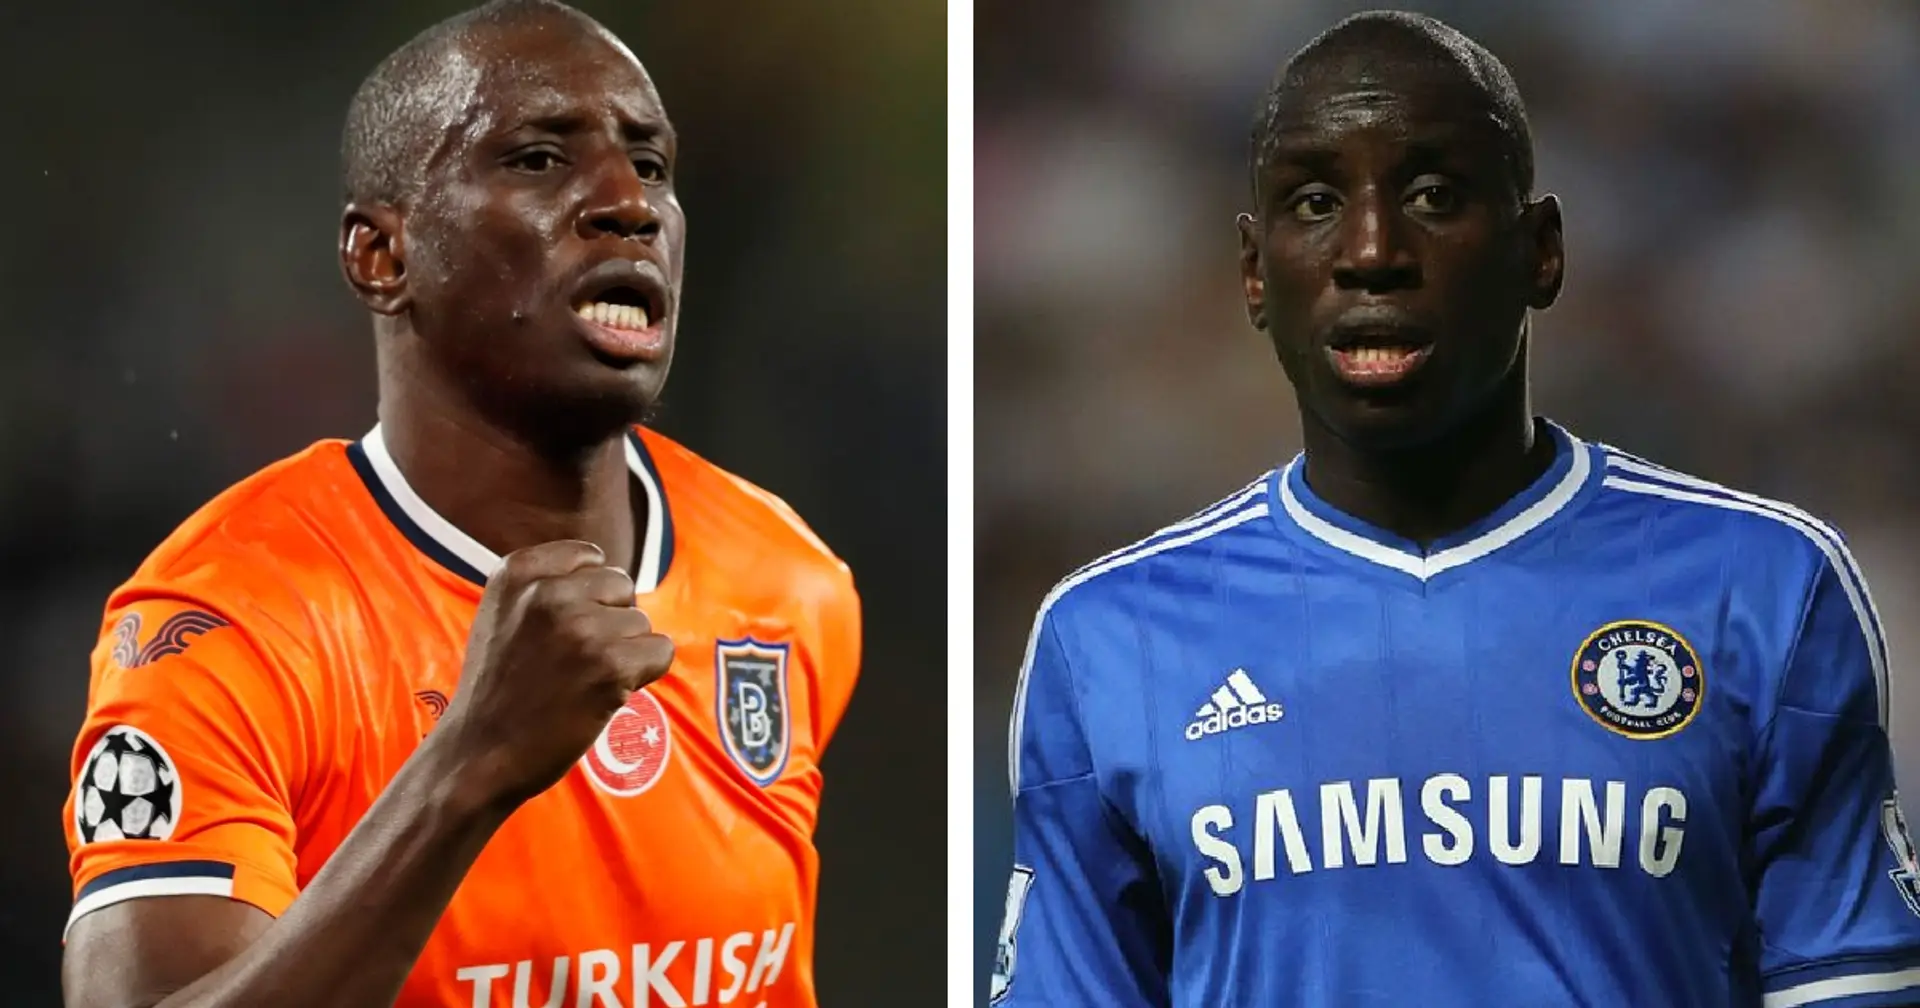 Ex-Chelsea man Demba Ba sensationally quits new club after just 48 minutes of playing time